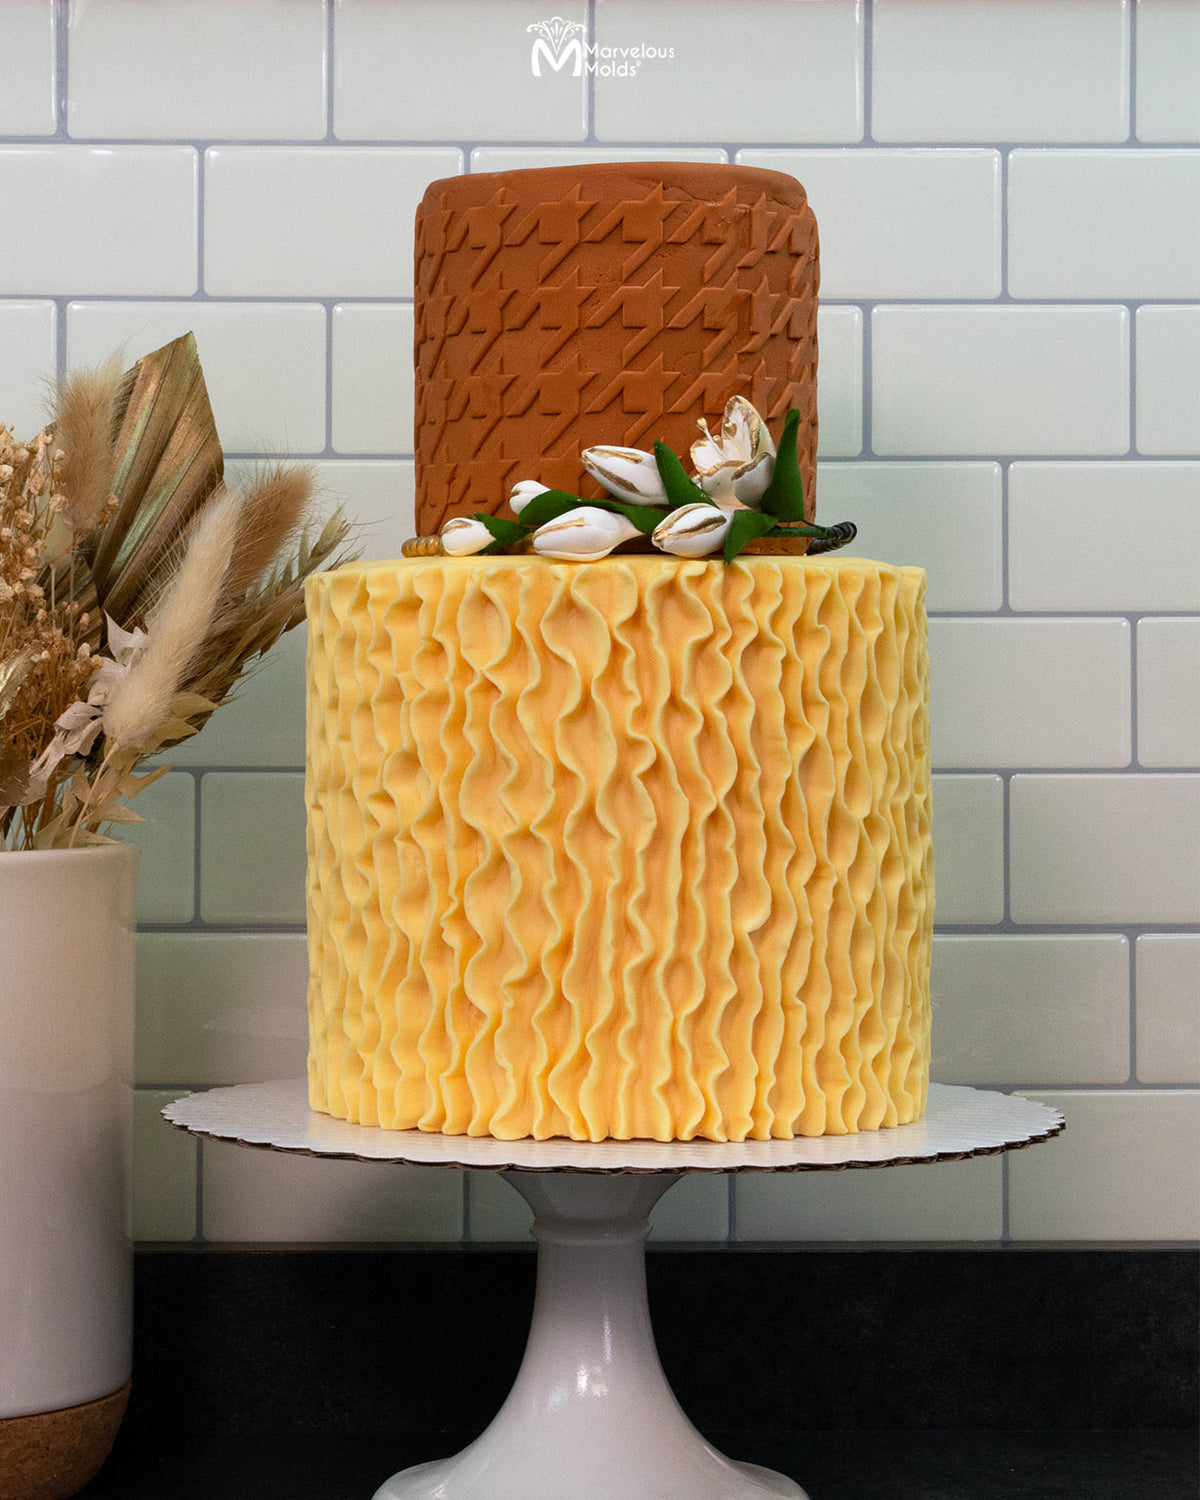 Fall Themed Wedding Cake Decorated with the Straight-Up Ruffle Simpress Silicone Mold by Marvelous Molds